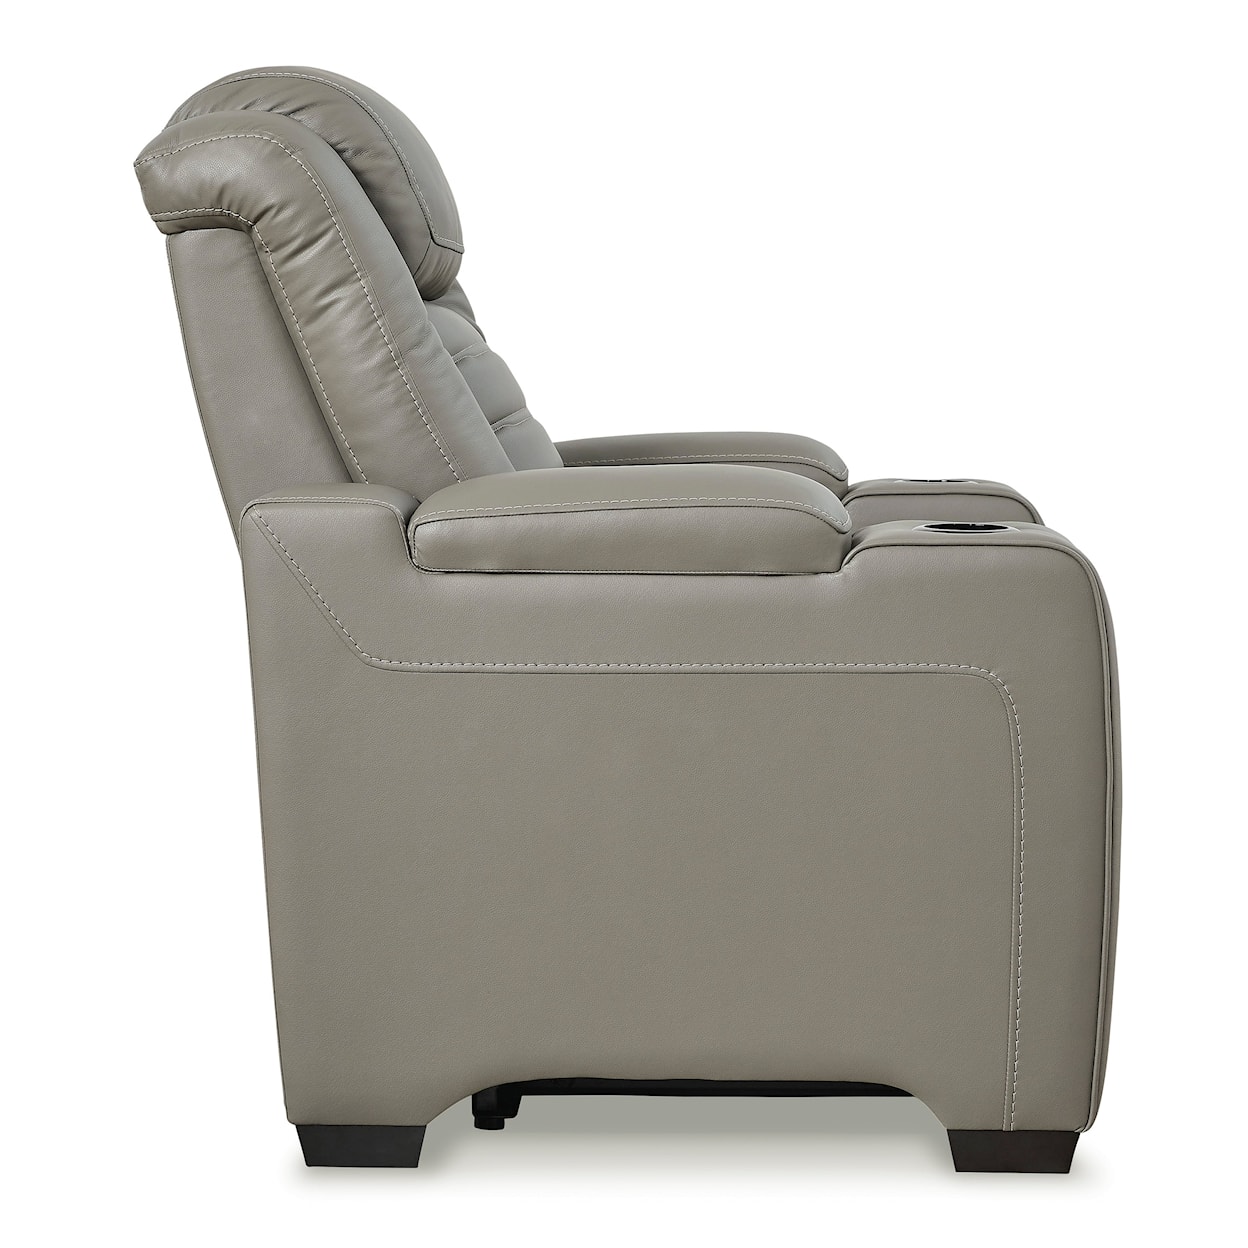 Signature Design by Ashley Furniture Backtrack Power Recliner